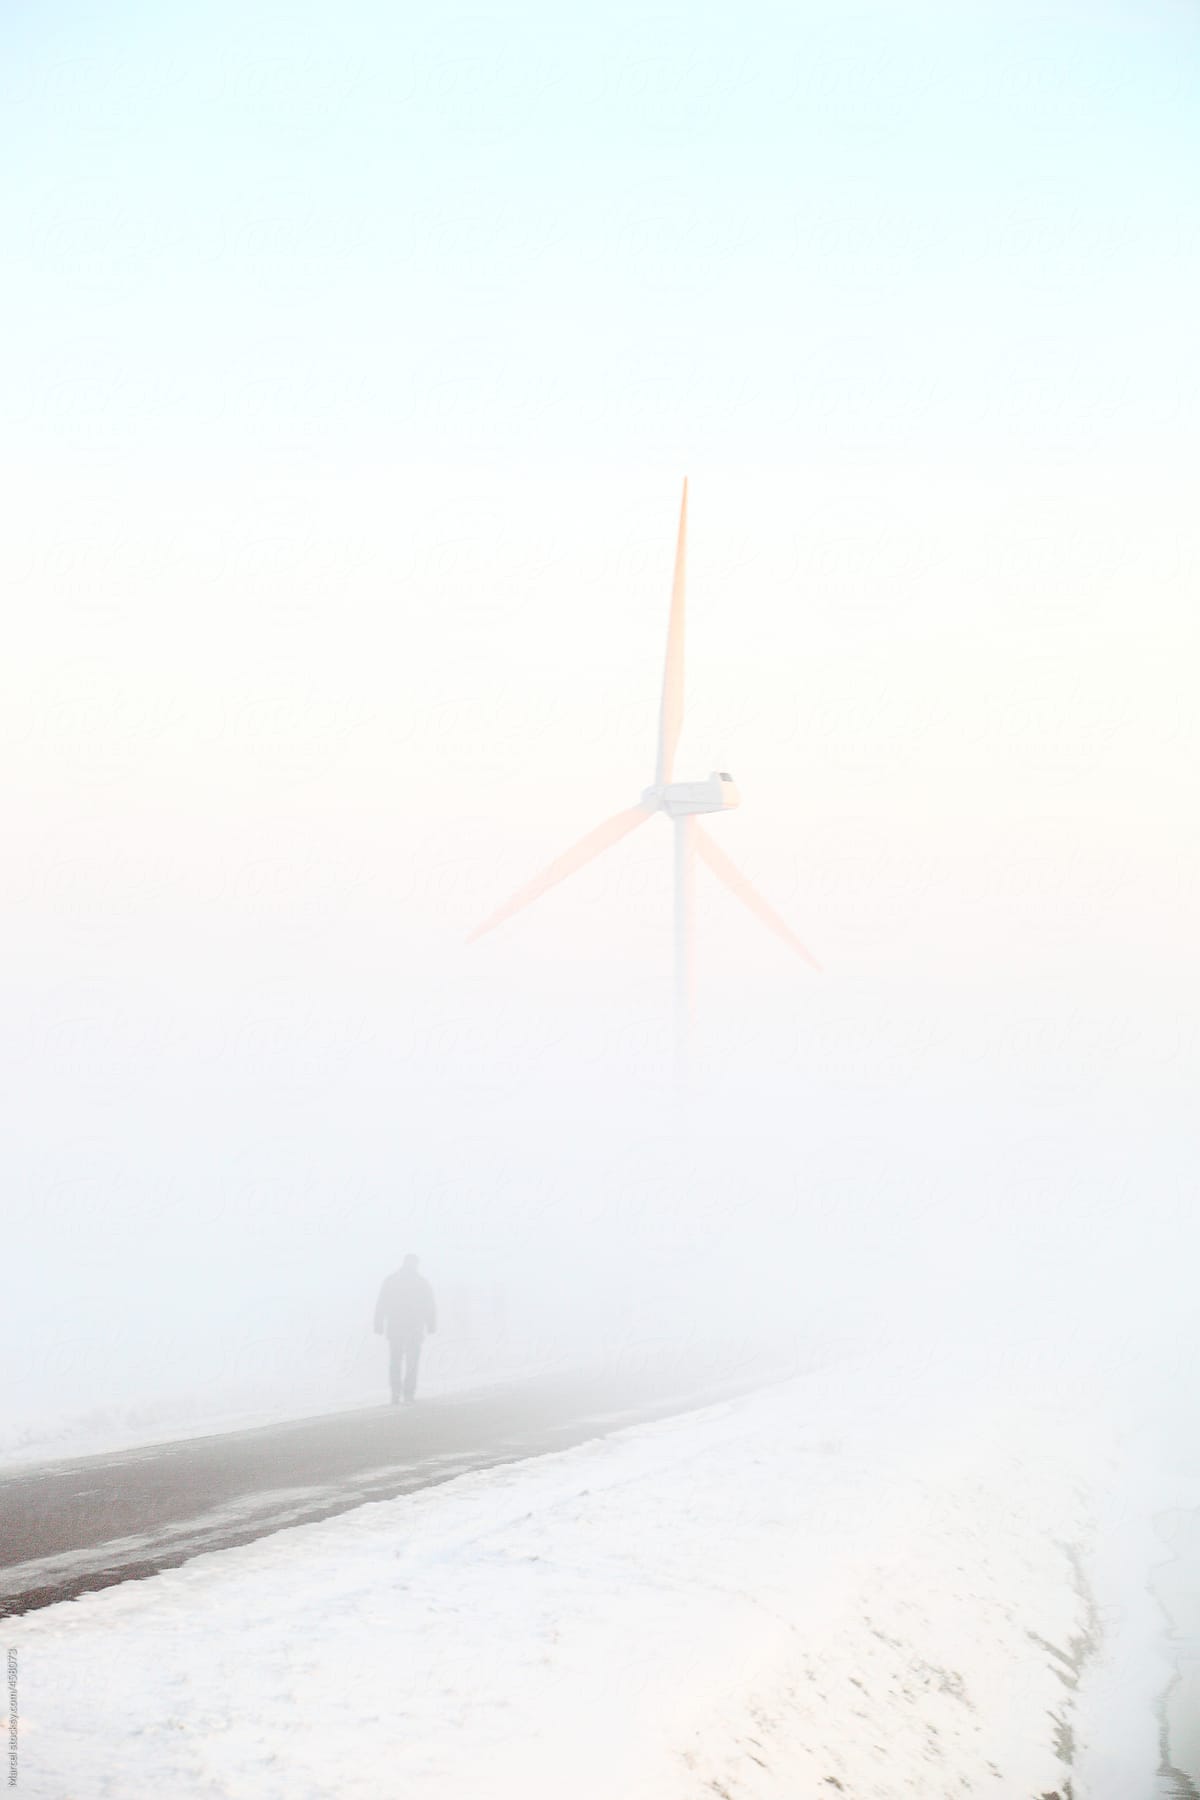 Walking man and windmill in dense fog in the winter